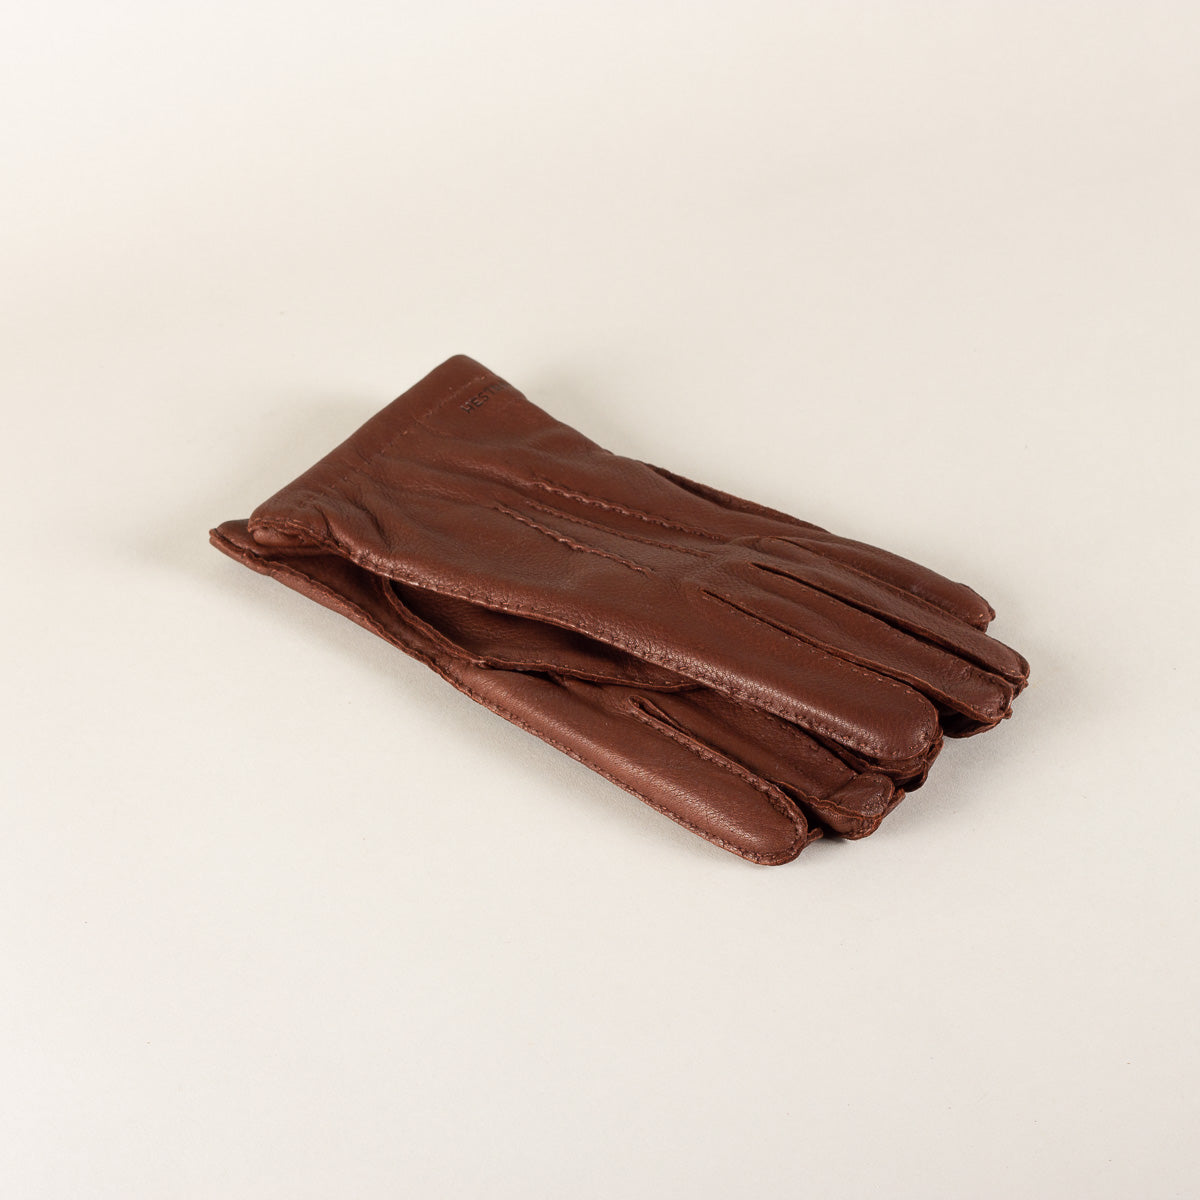 HESTRA Matthew leather driving gloves - chocolate